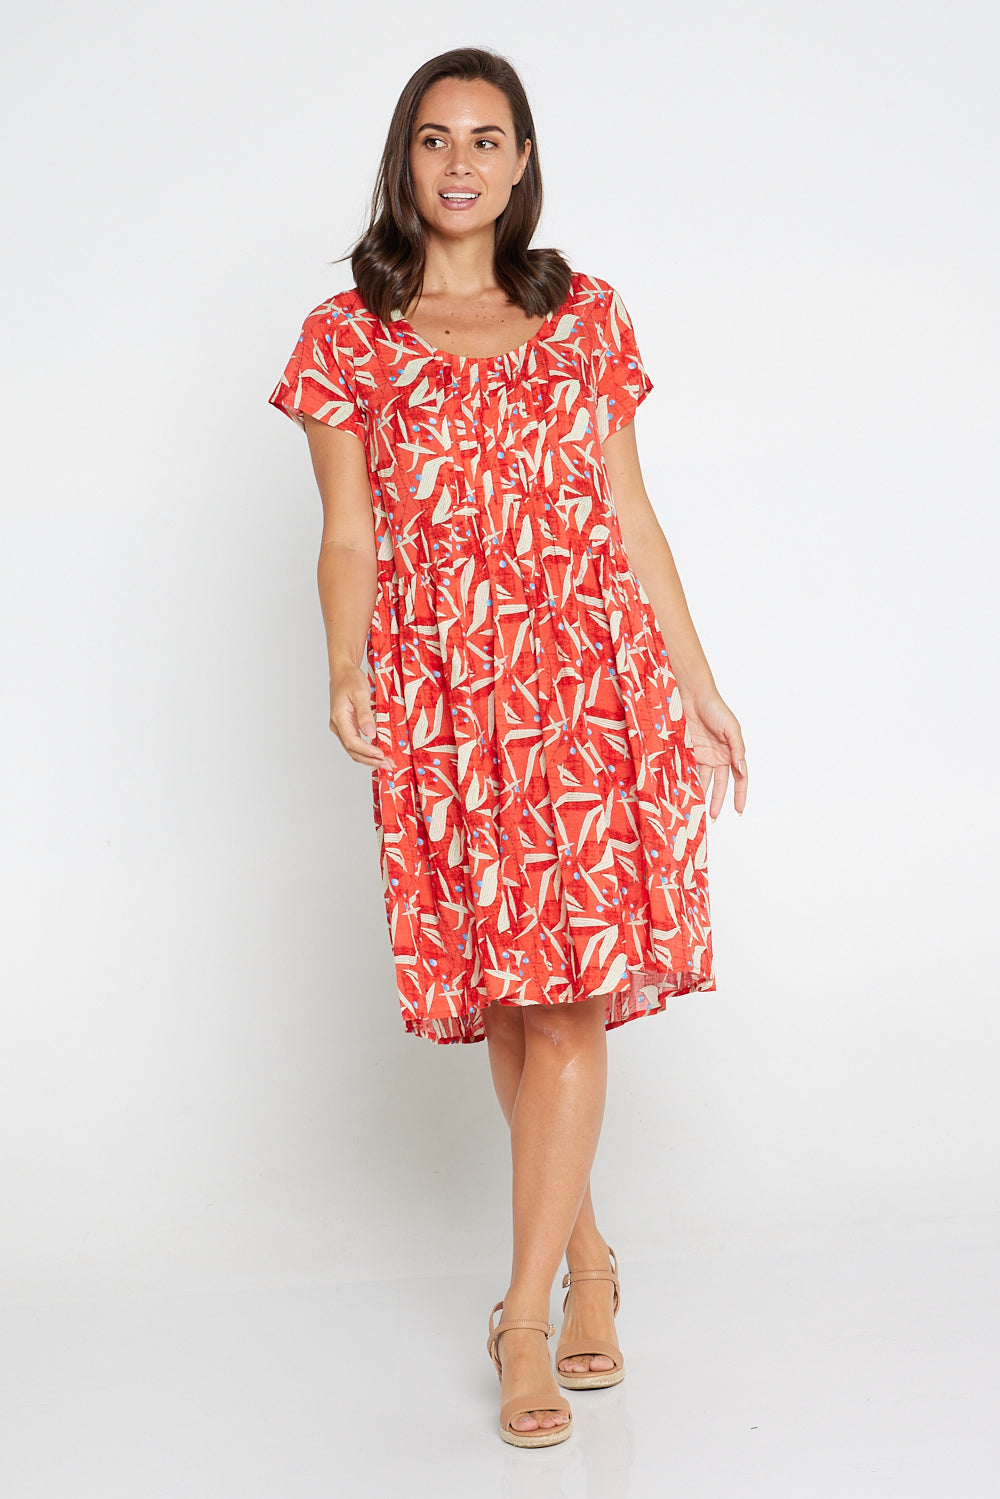 Kristall Berry Red Floral Print Bell Sleeve Mini Dress